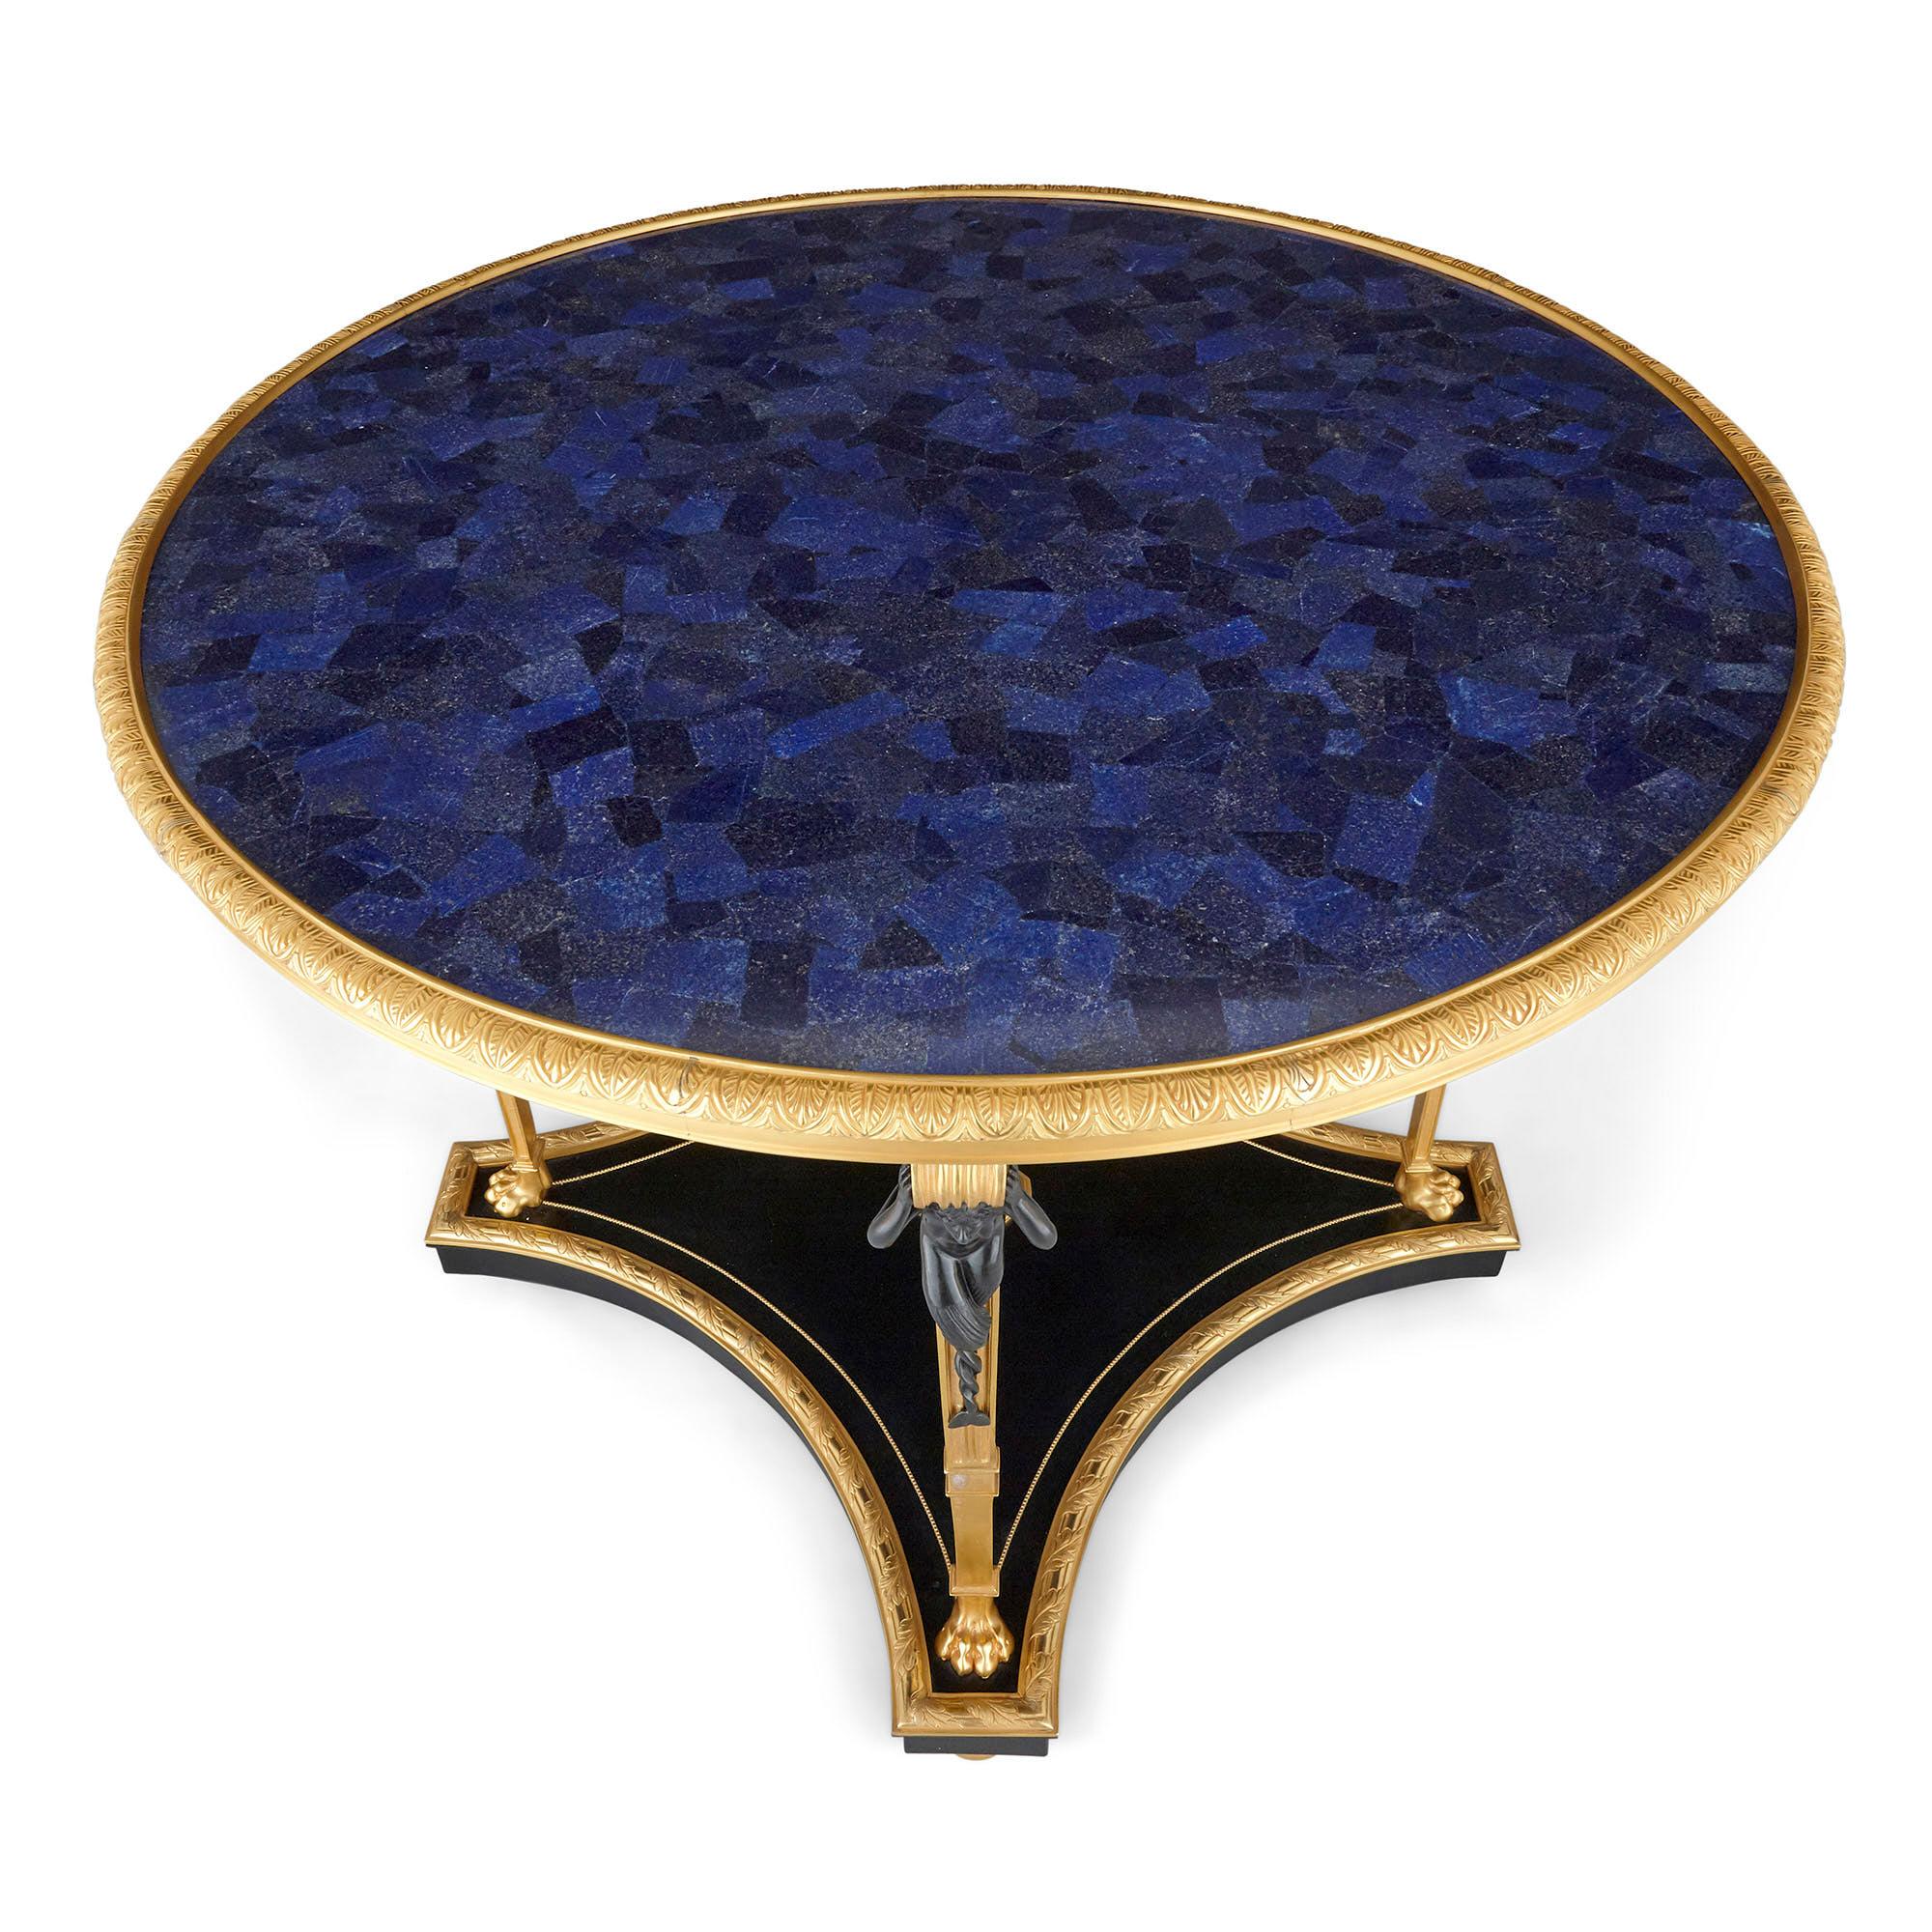 20th Century Neoclassical Empire Style Ormolu and Lapis Lazuli Table For Sale